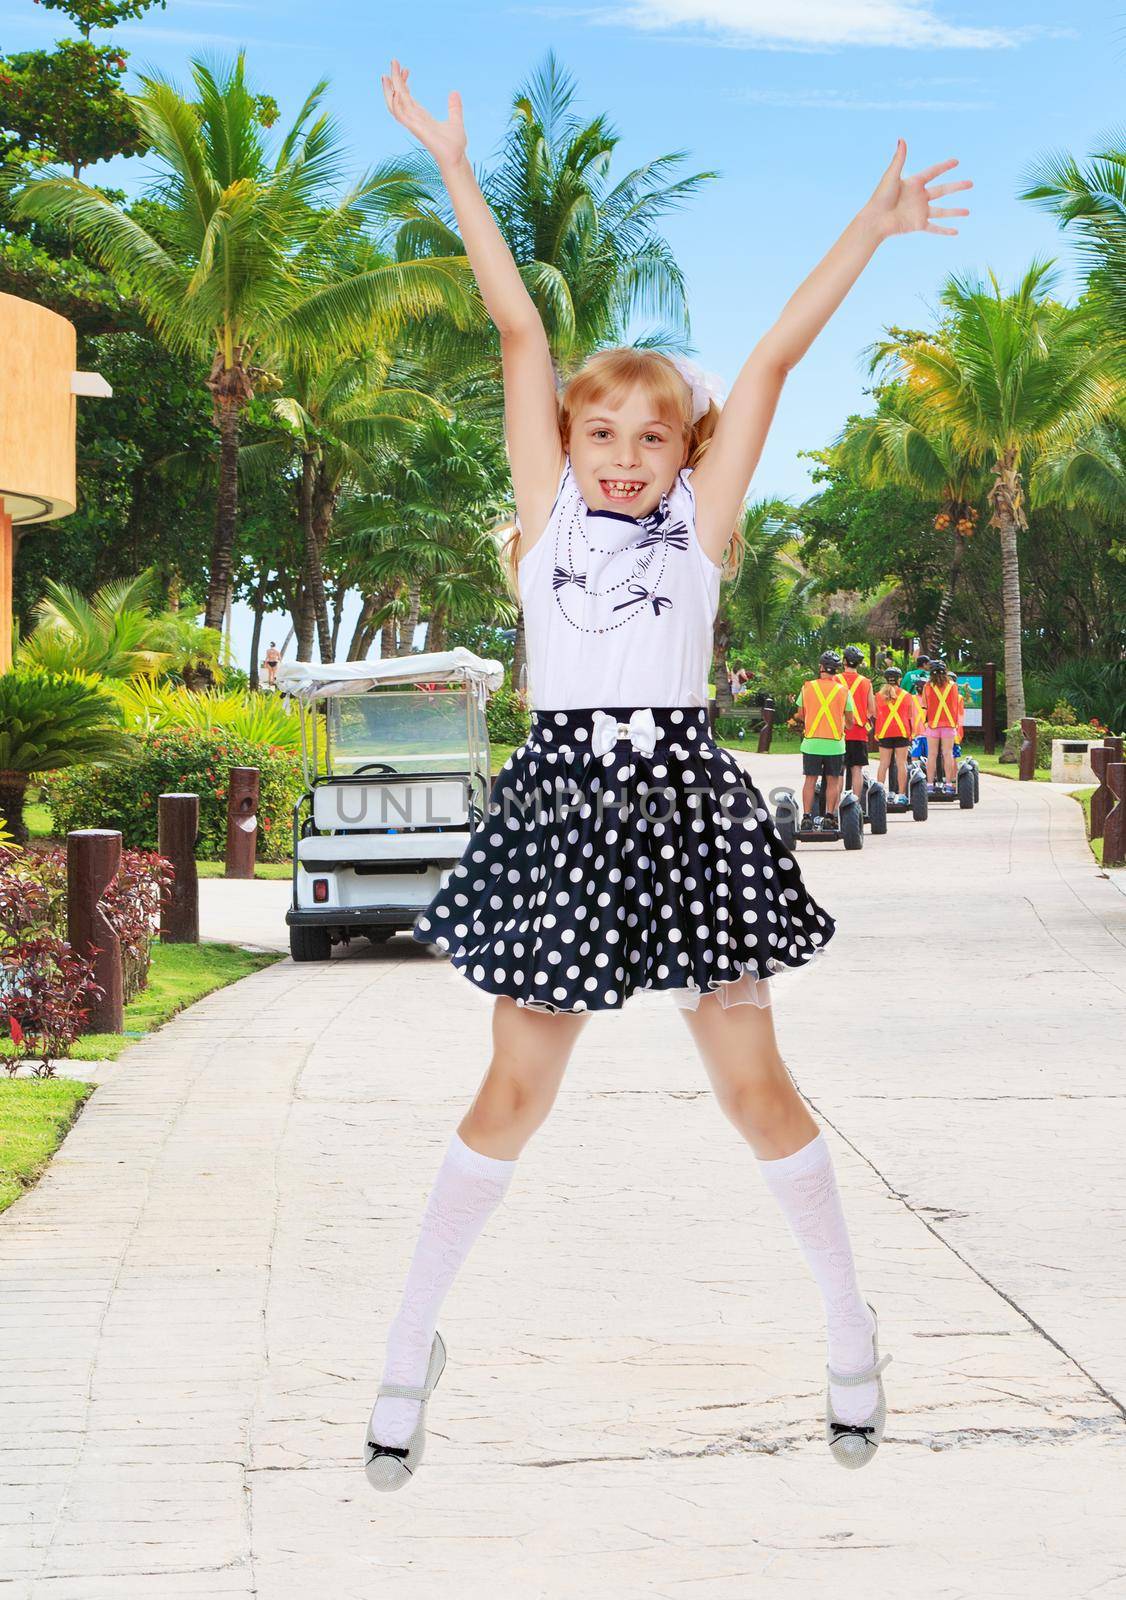 Cheerful little girl short skirt polka dot jumps with her arms and legs.On the background of the road, palm trees and blue sky with clouds.